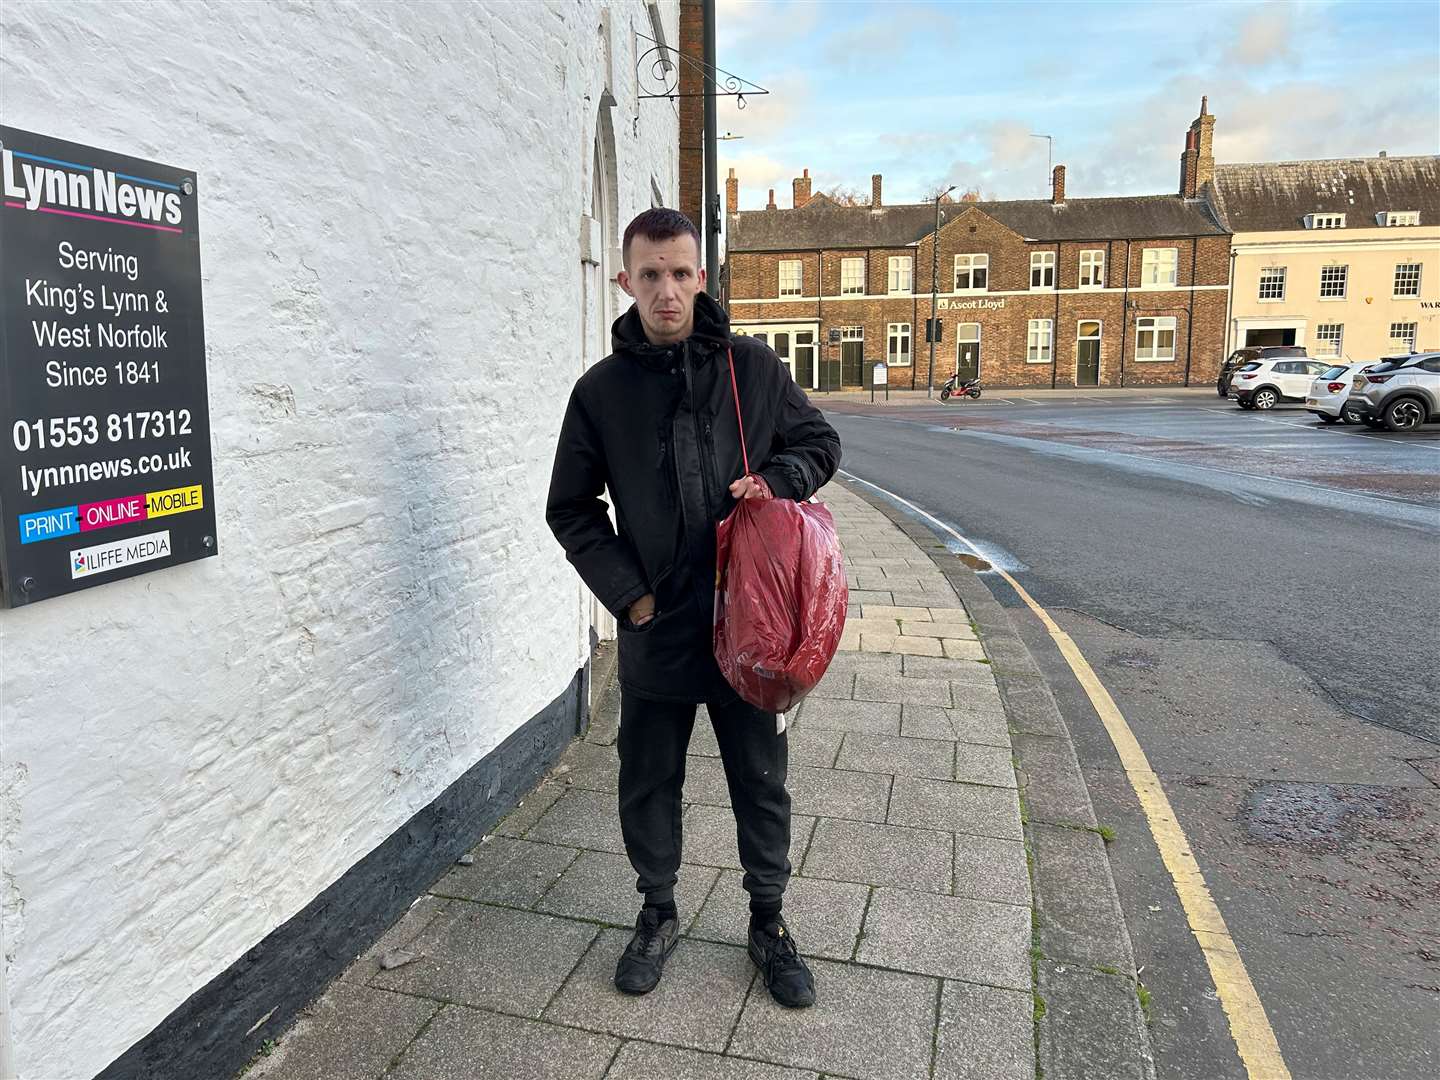 Andrew Jarman has been sleeping rough in Lynn for months